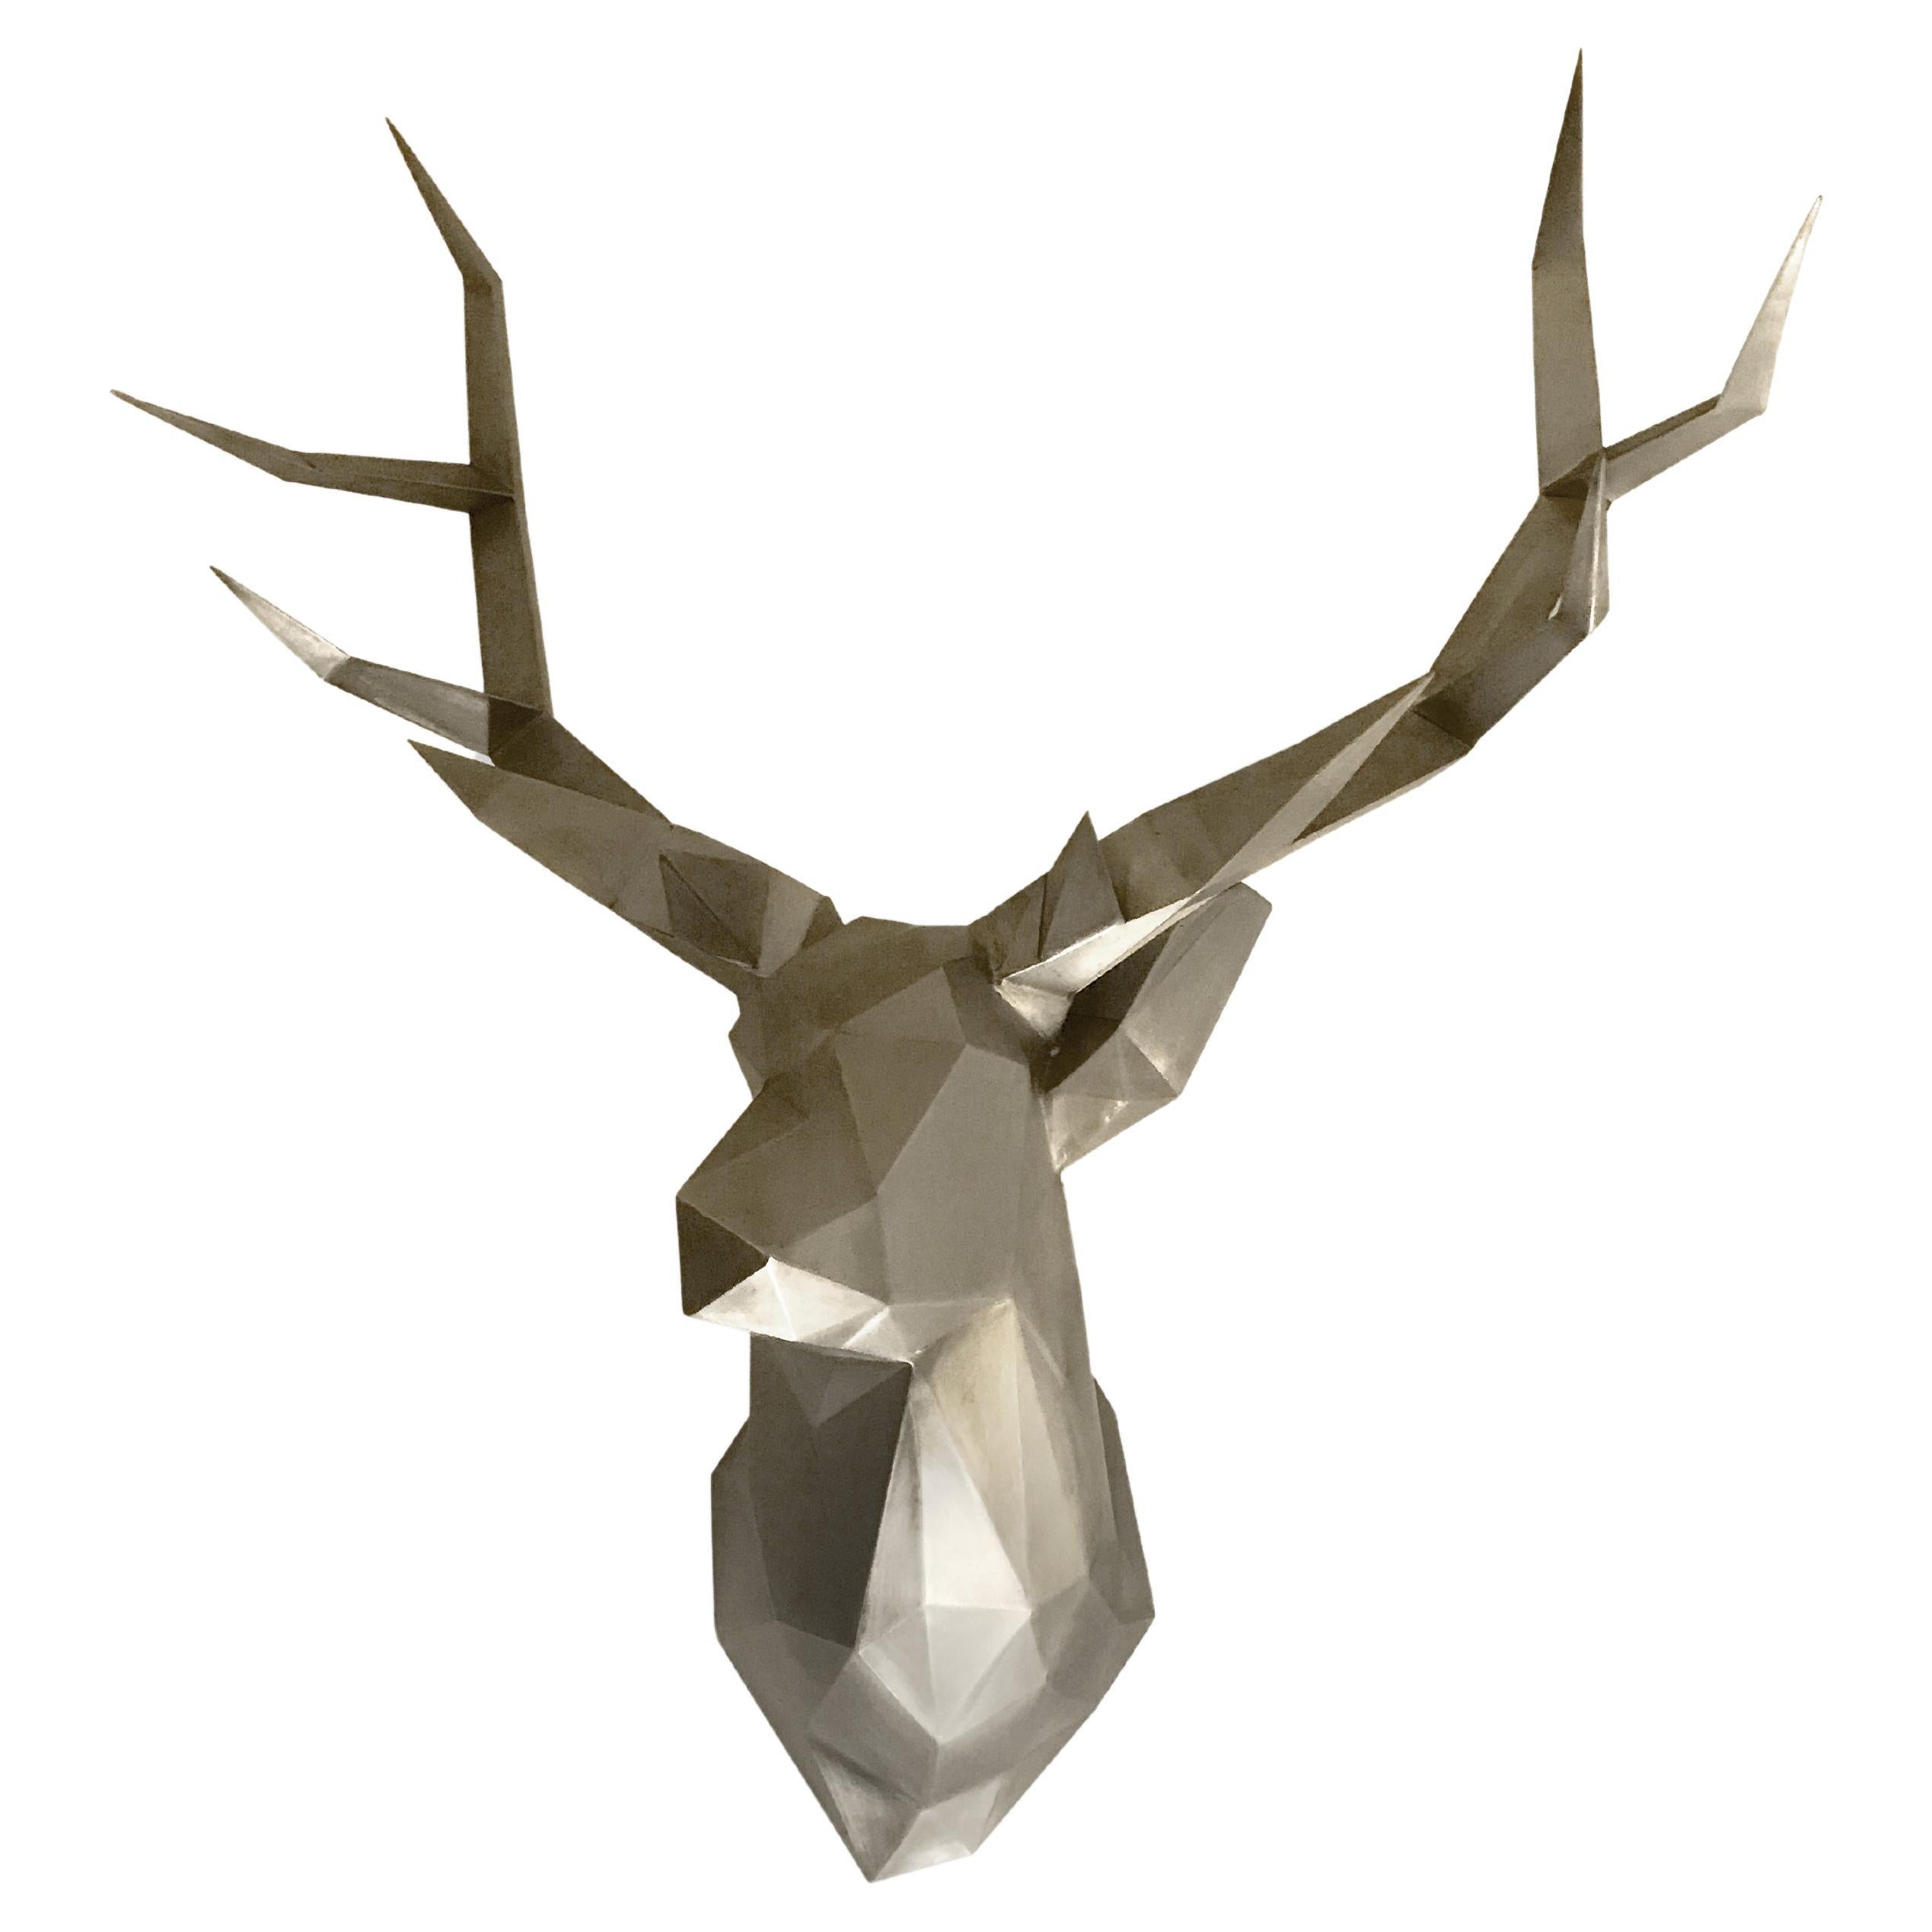 "STAG" - Faceted Elk Wall Mount - Fabricated metal